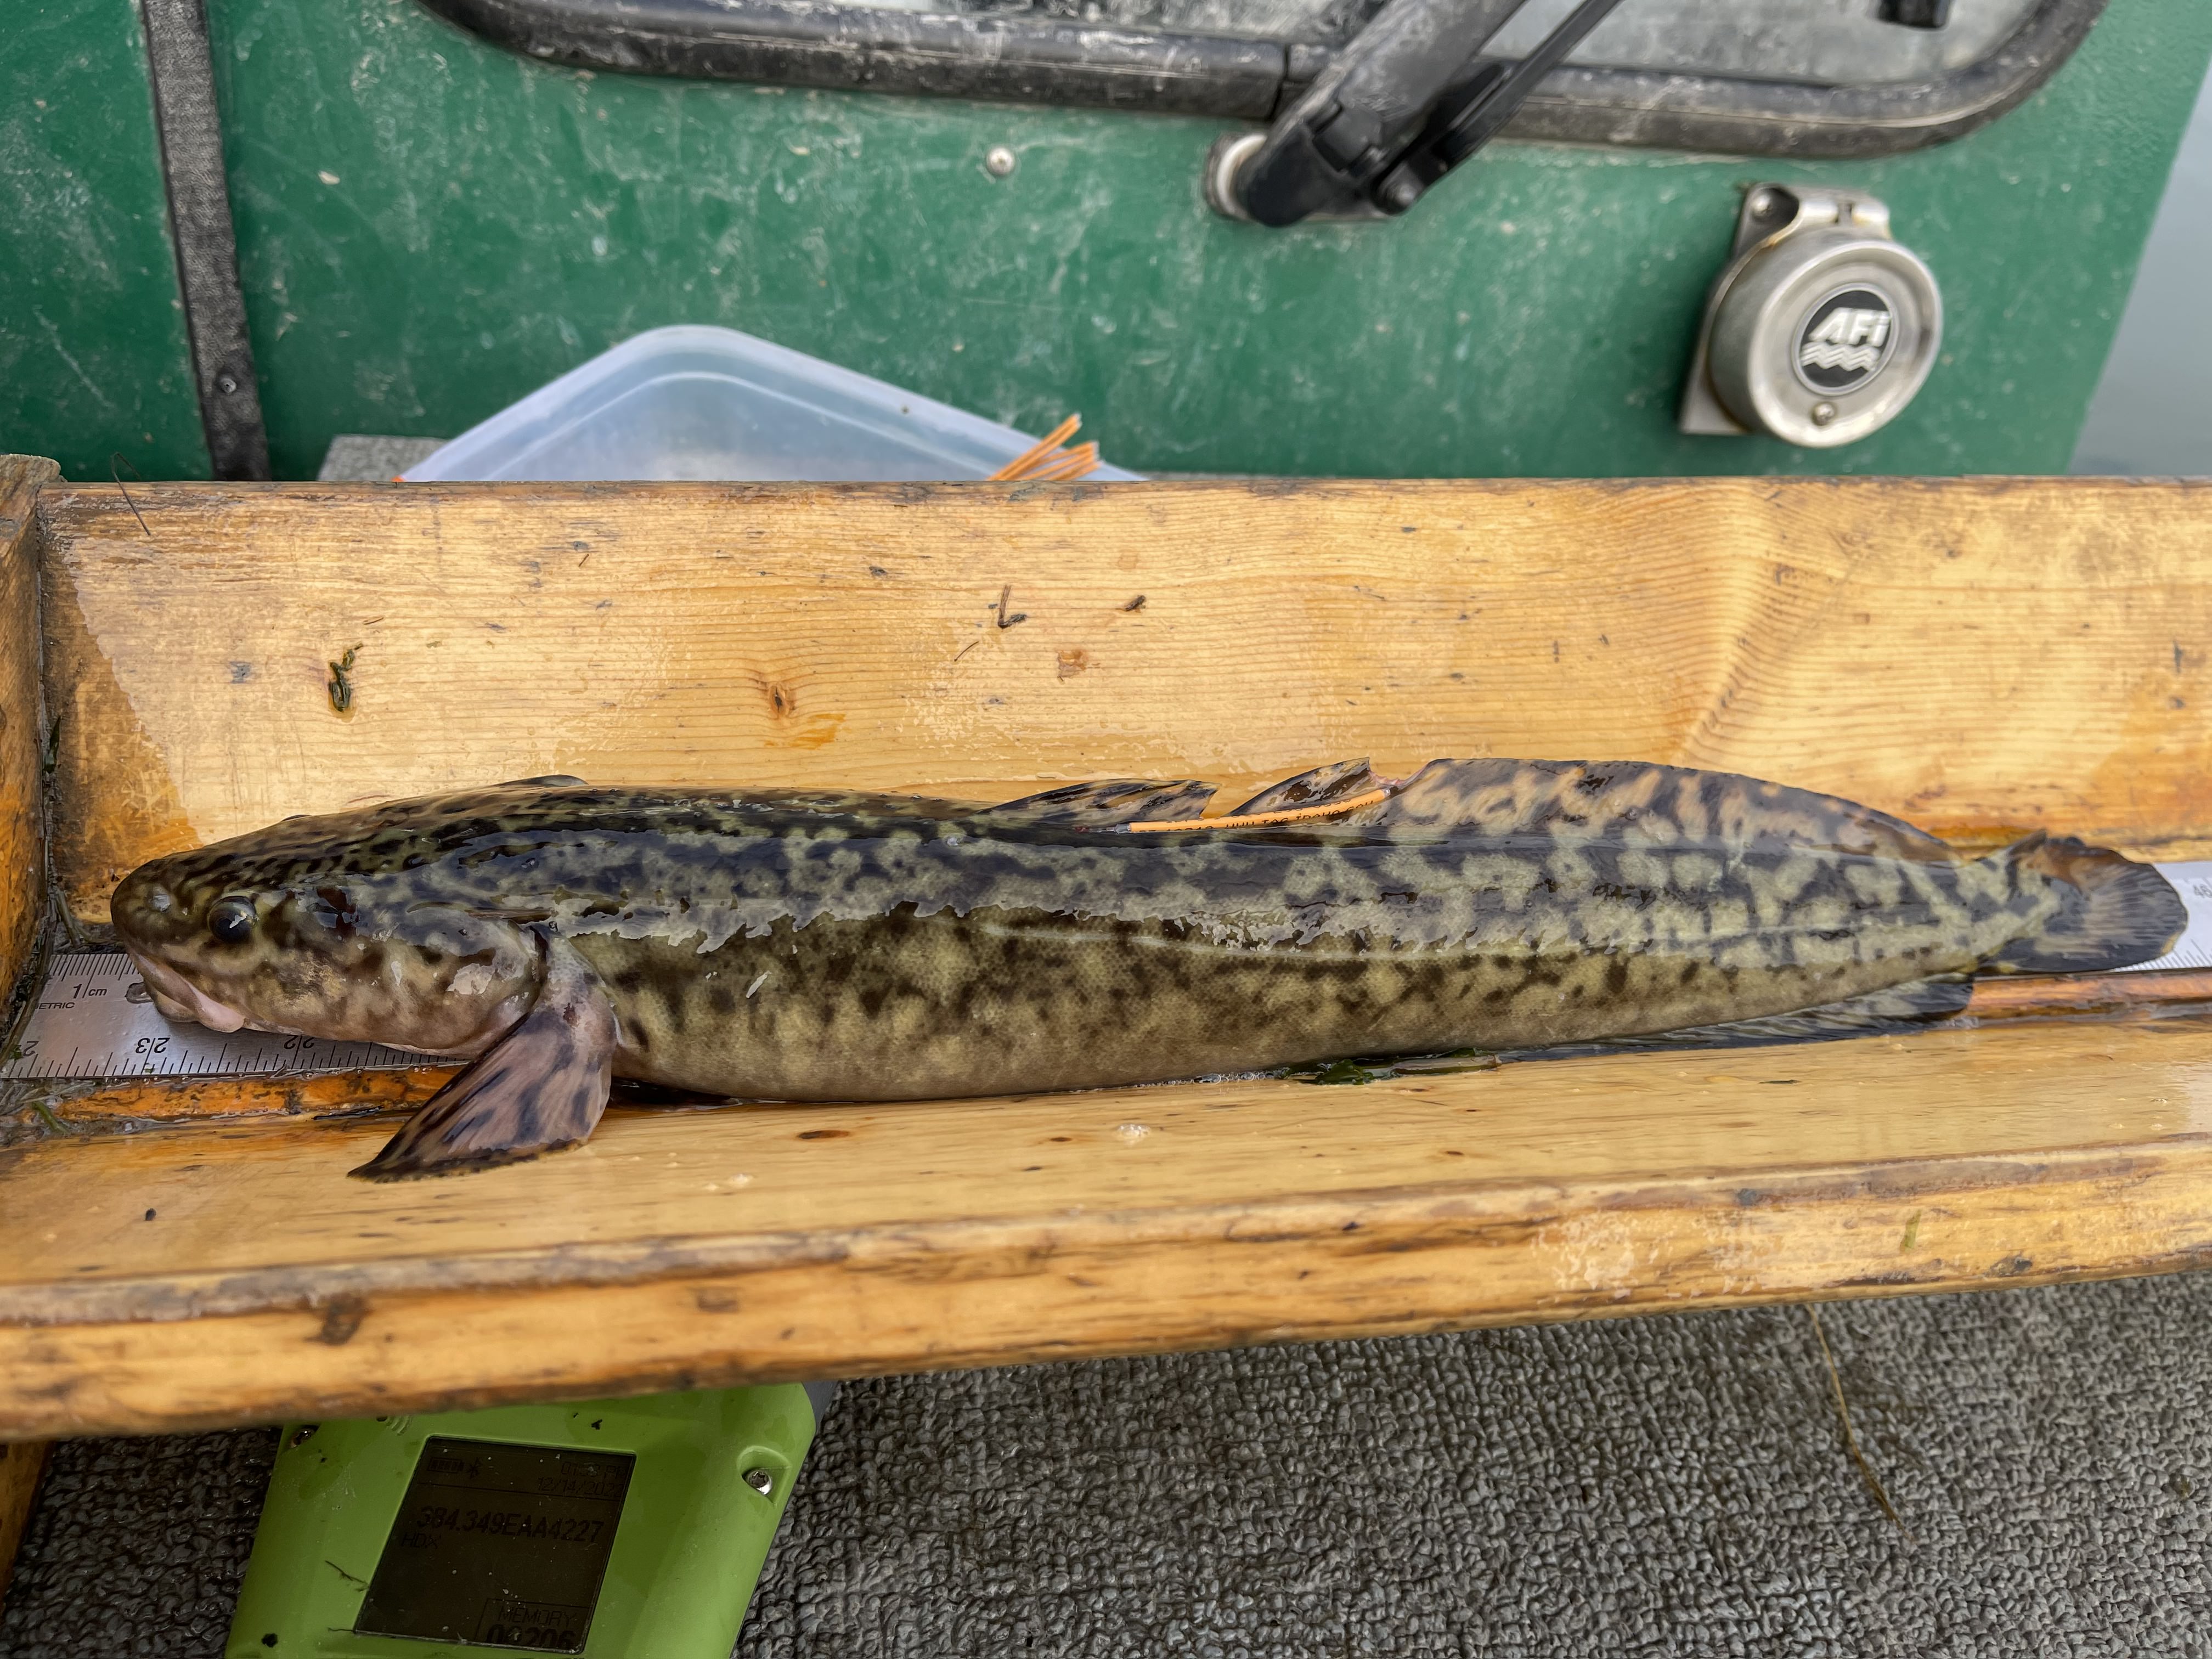 Kootenai River burbot with a tag in its back